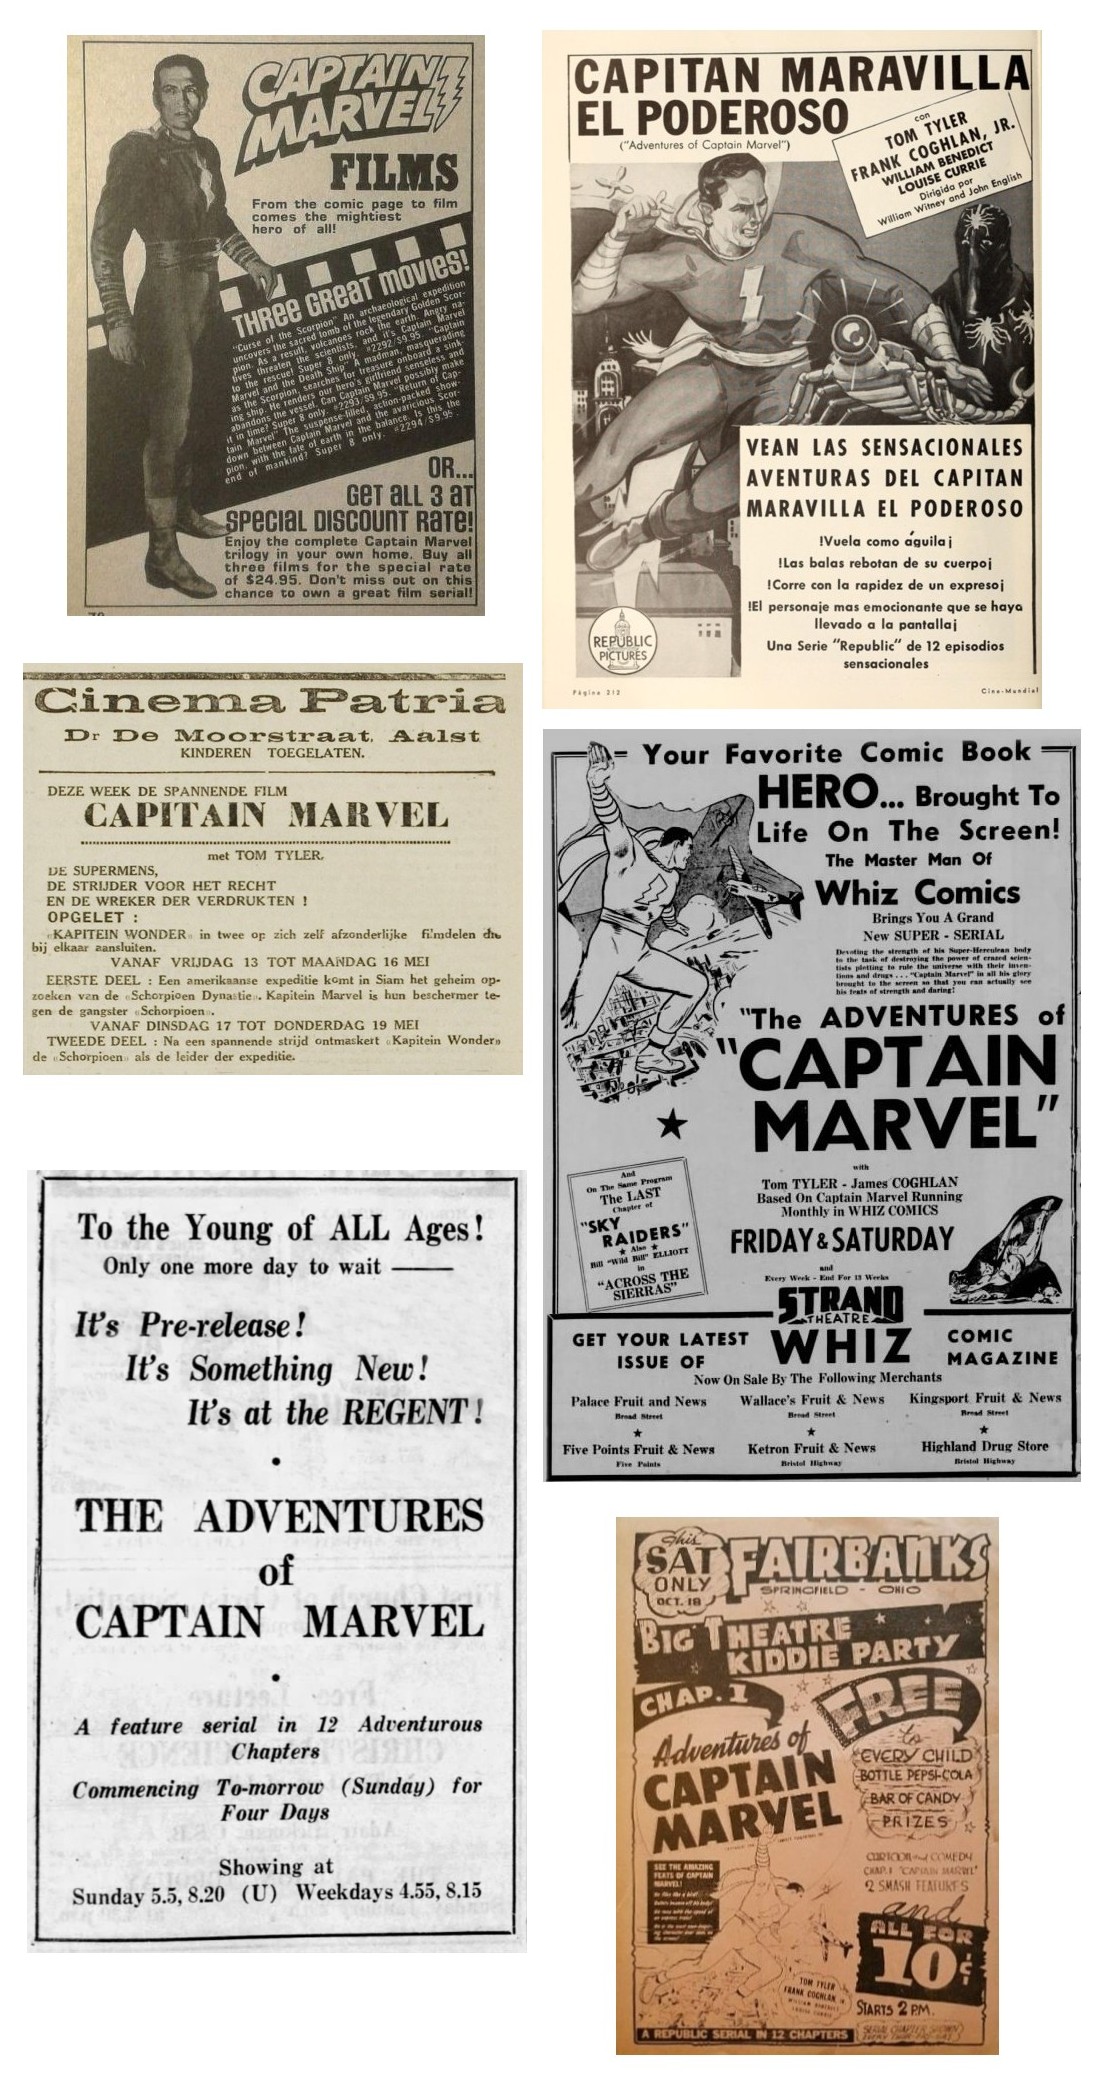 Adventures of Captain Marvel one page ads cinema ad